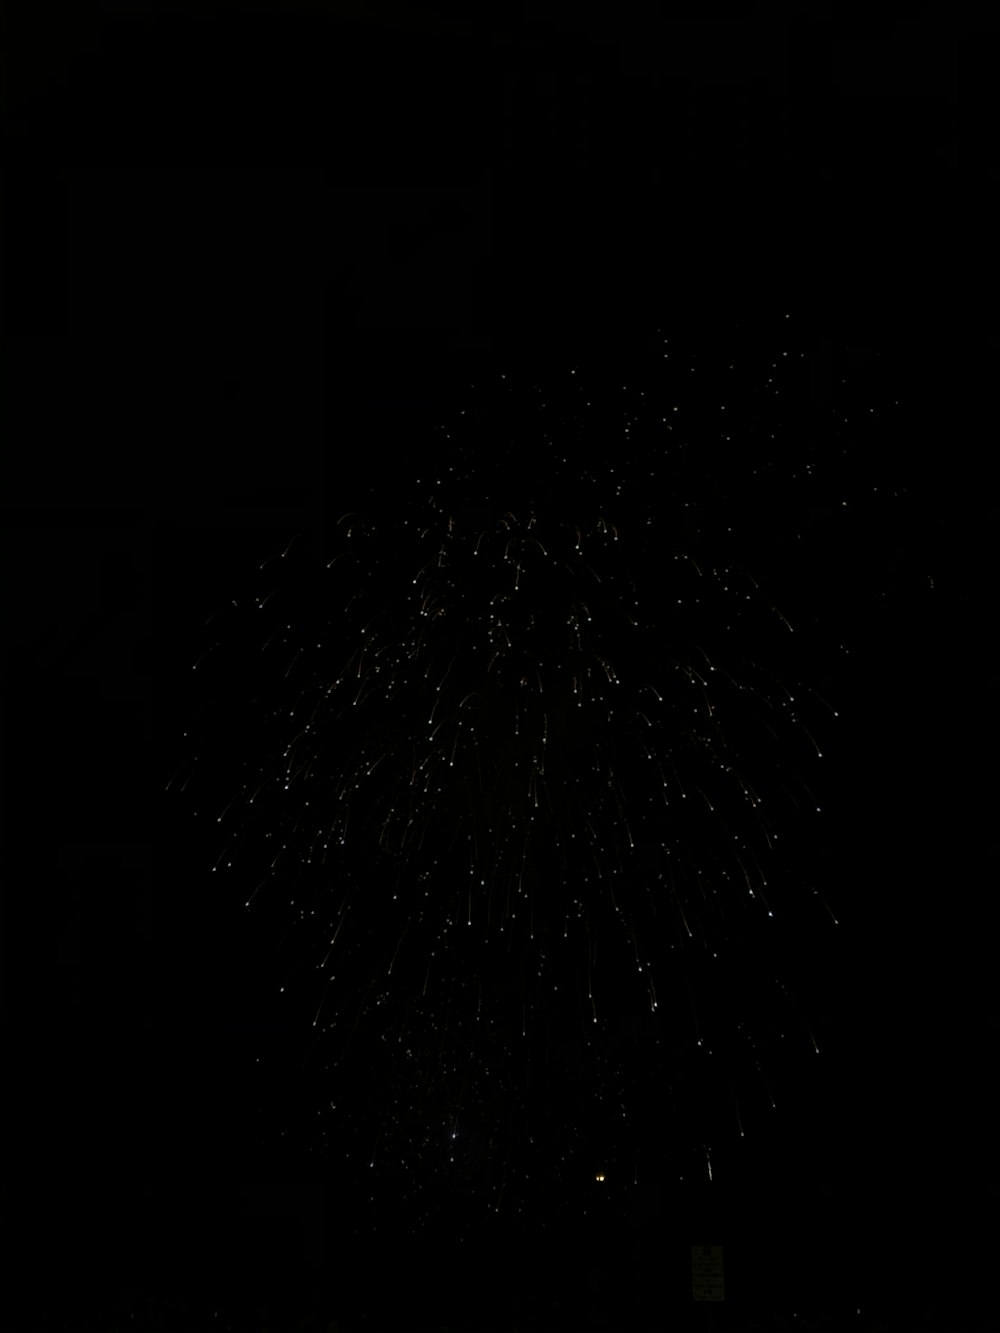 a black sky filled with lots of fireworks